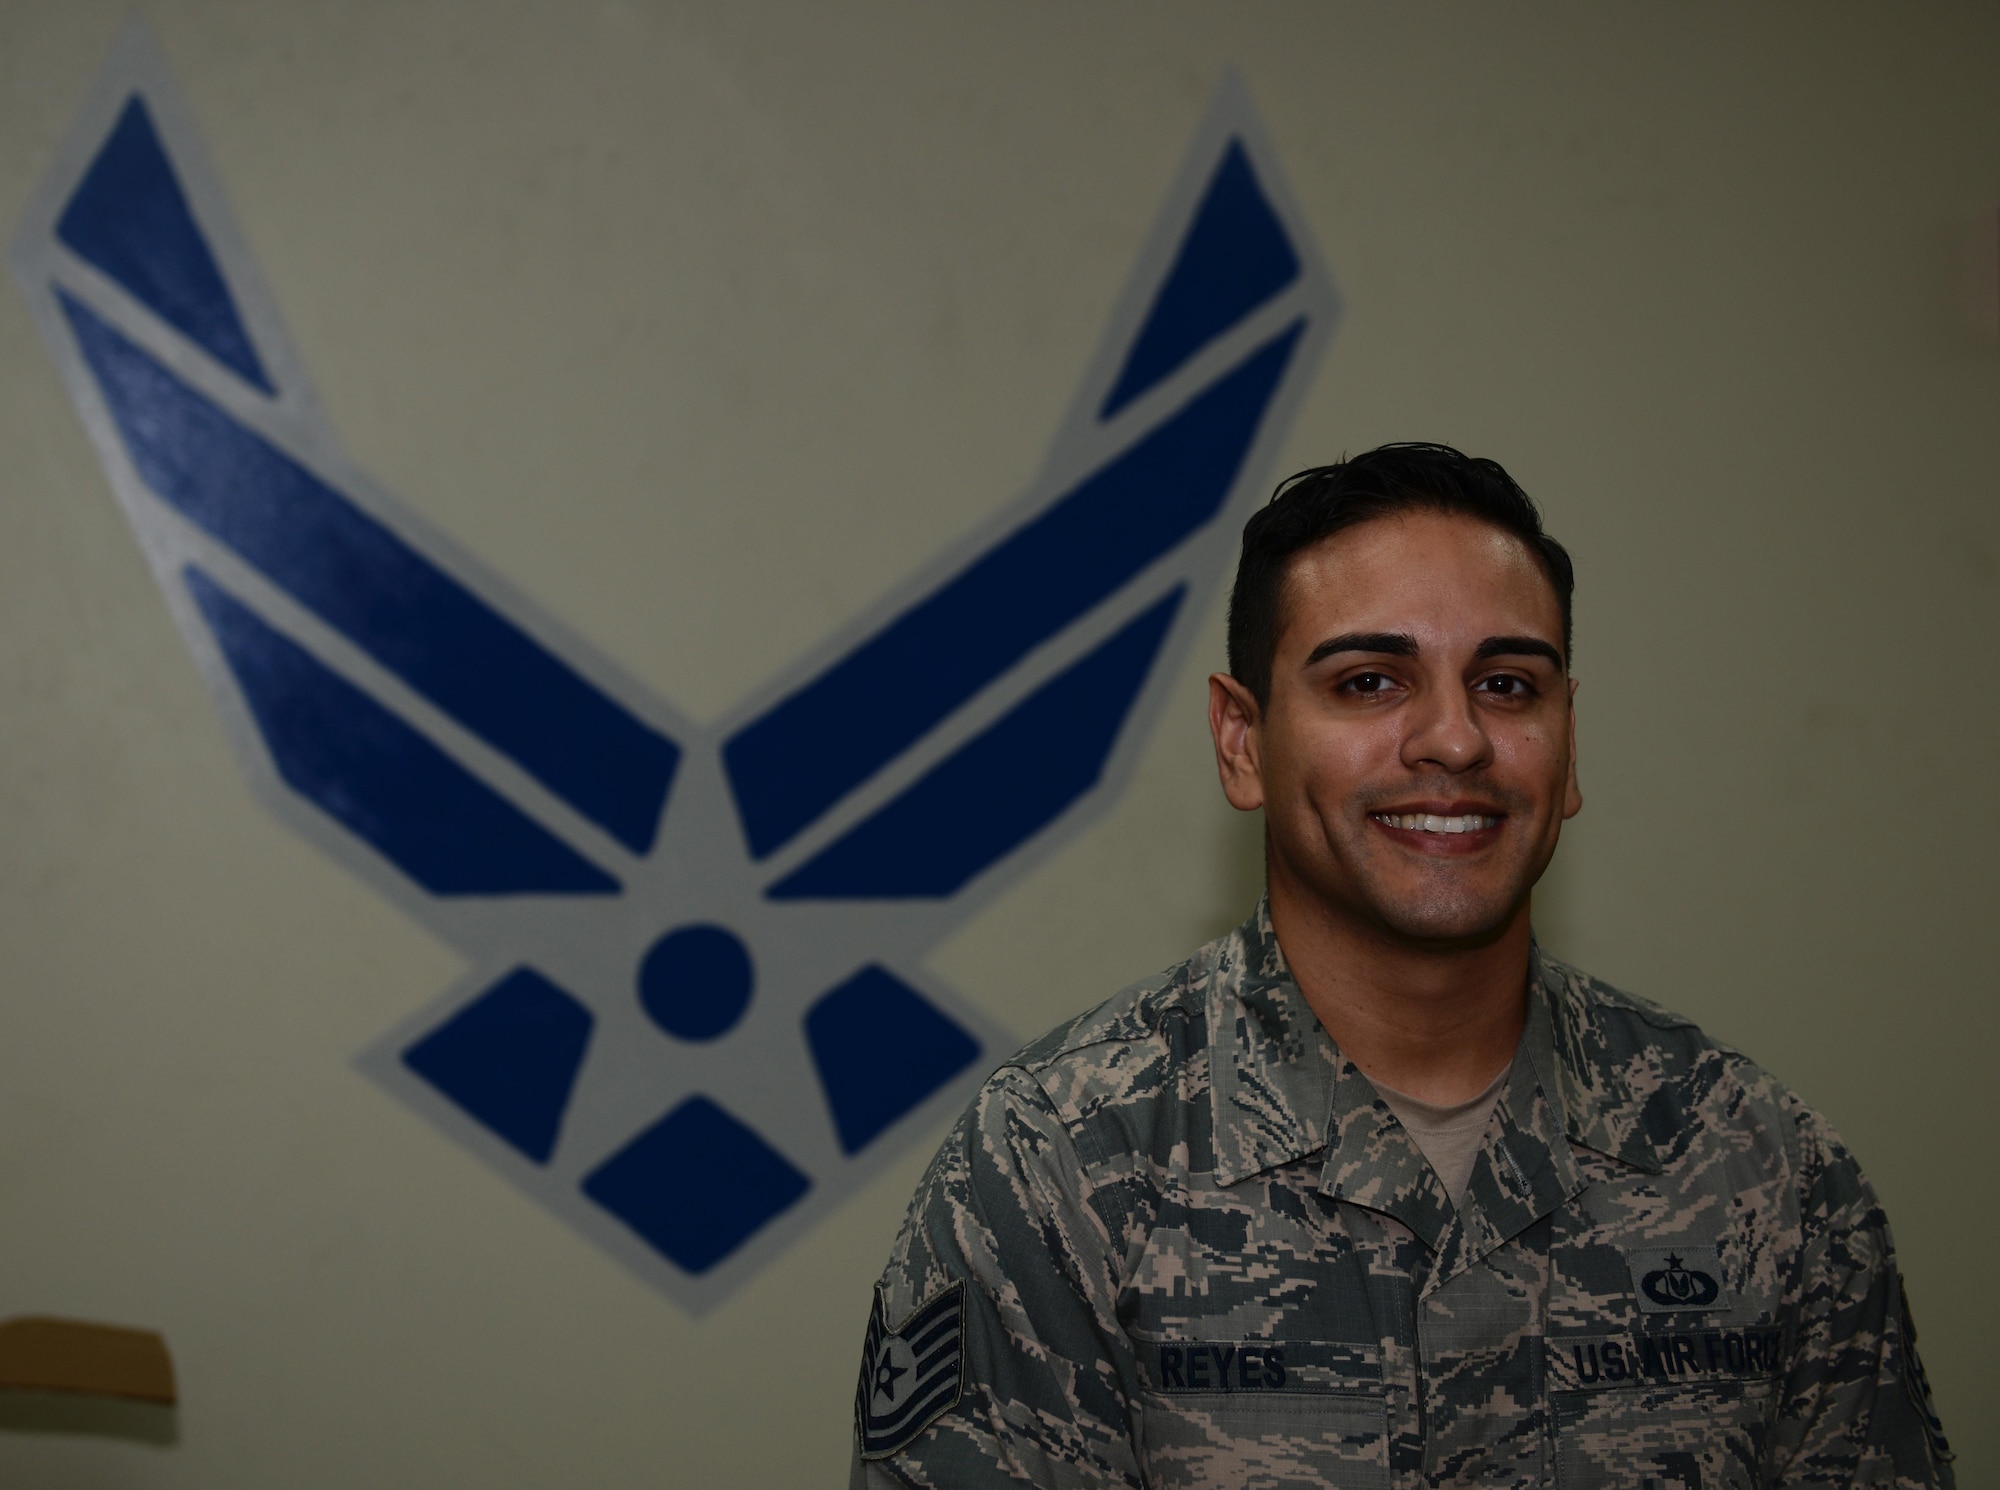 Tech. Sgt. Luis Reyes, 36th Operations Support Squadron aircrew flight equipment craftsman, was selected March 2016 to commission through the Senior Leader Enlisted Commissioning Program – Active Duty Scholarship. Through the program, Reyes plans to complete his bachelor’s degree and commission in the Air Force through Officer Training School. (U.S. Air Force photo by Airman 1st Class Jacob Skovo)